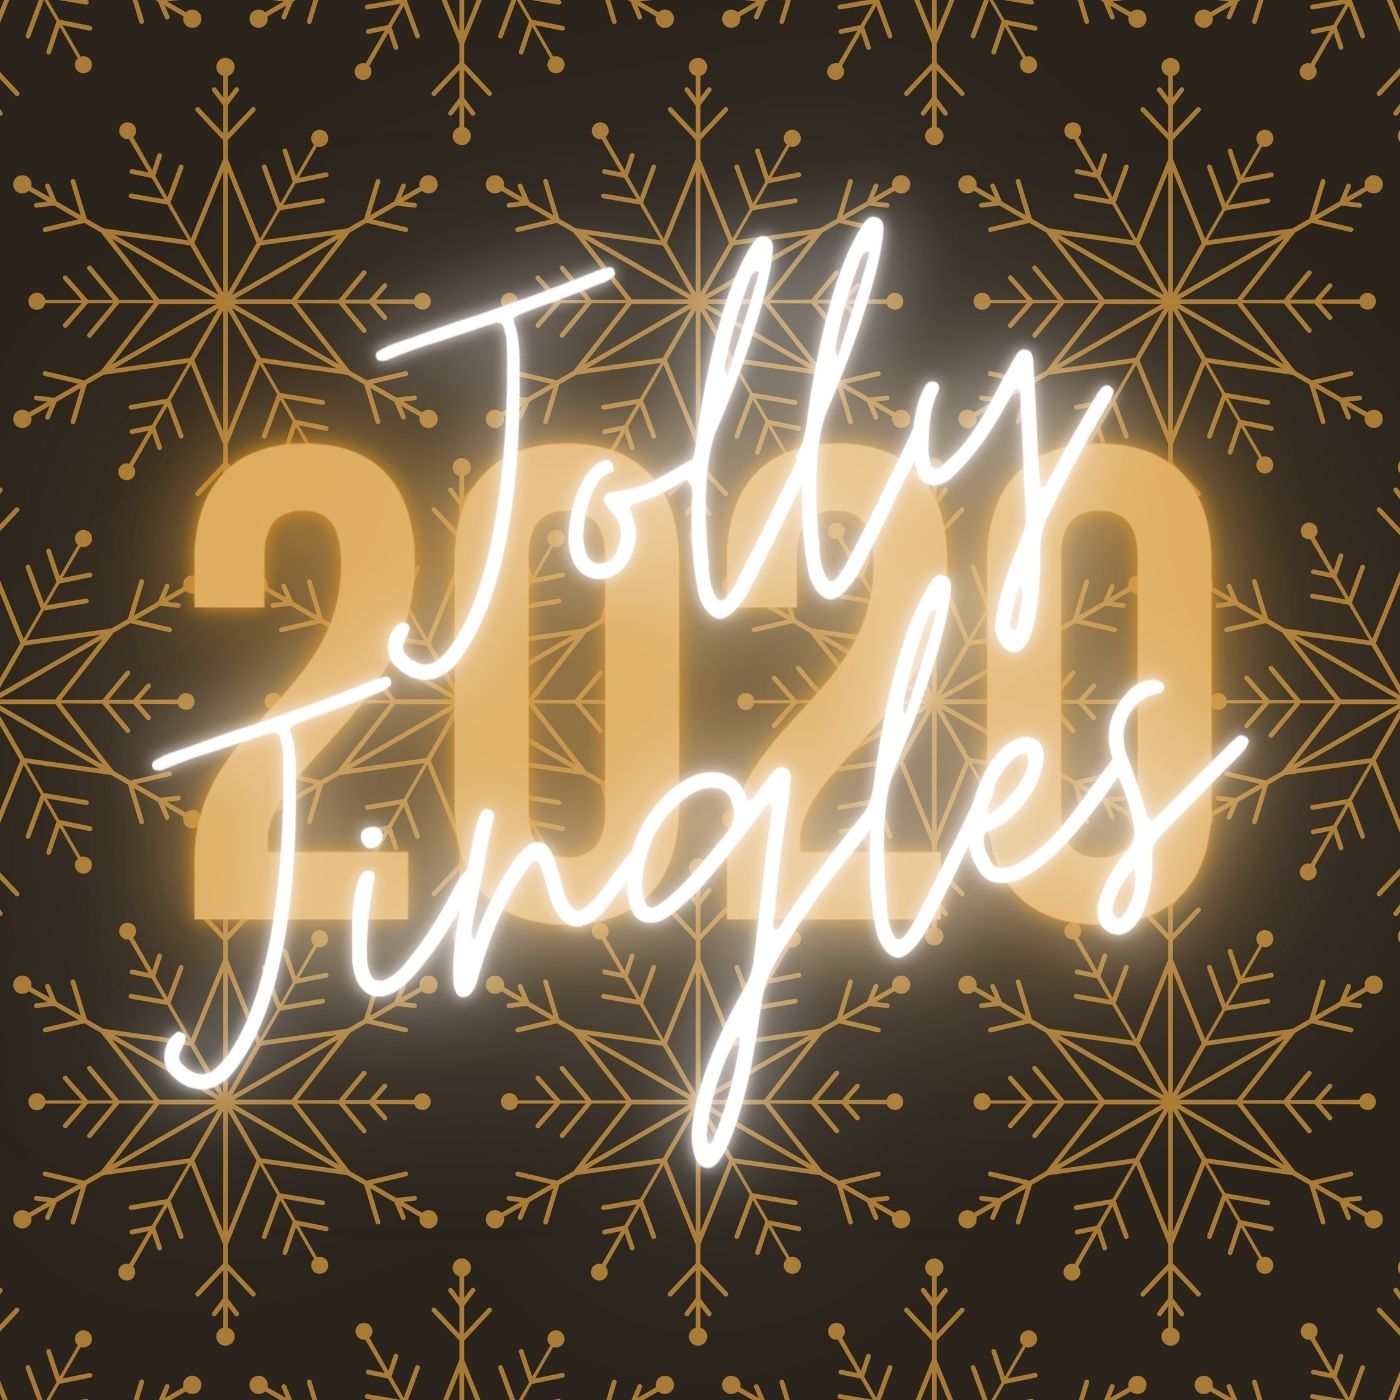 a square image of repeating gold snowflakes with neon writing saying jolly jingles 2020